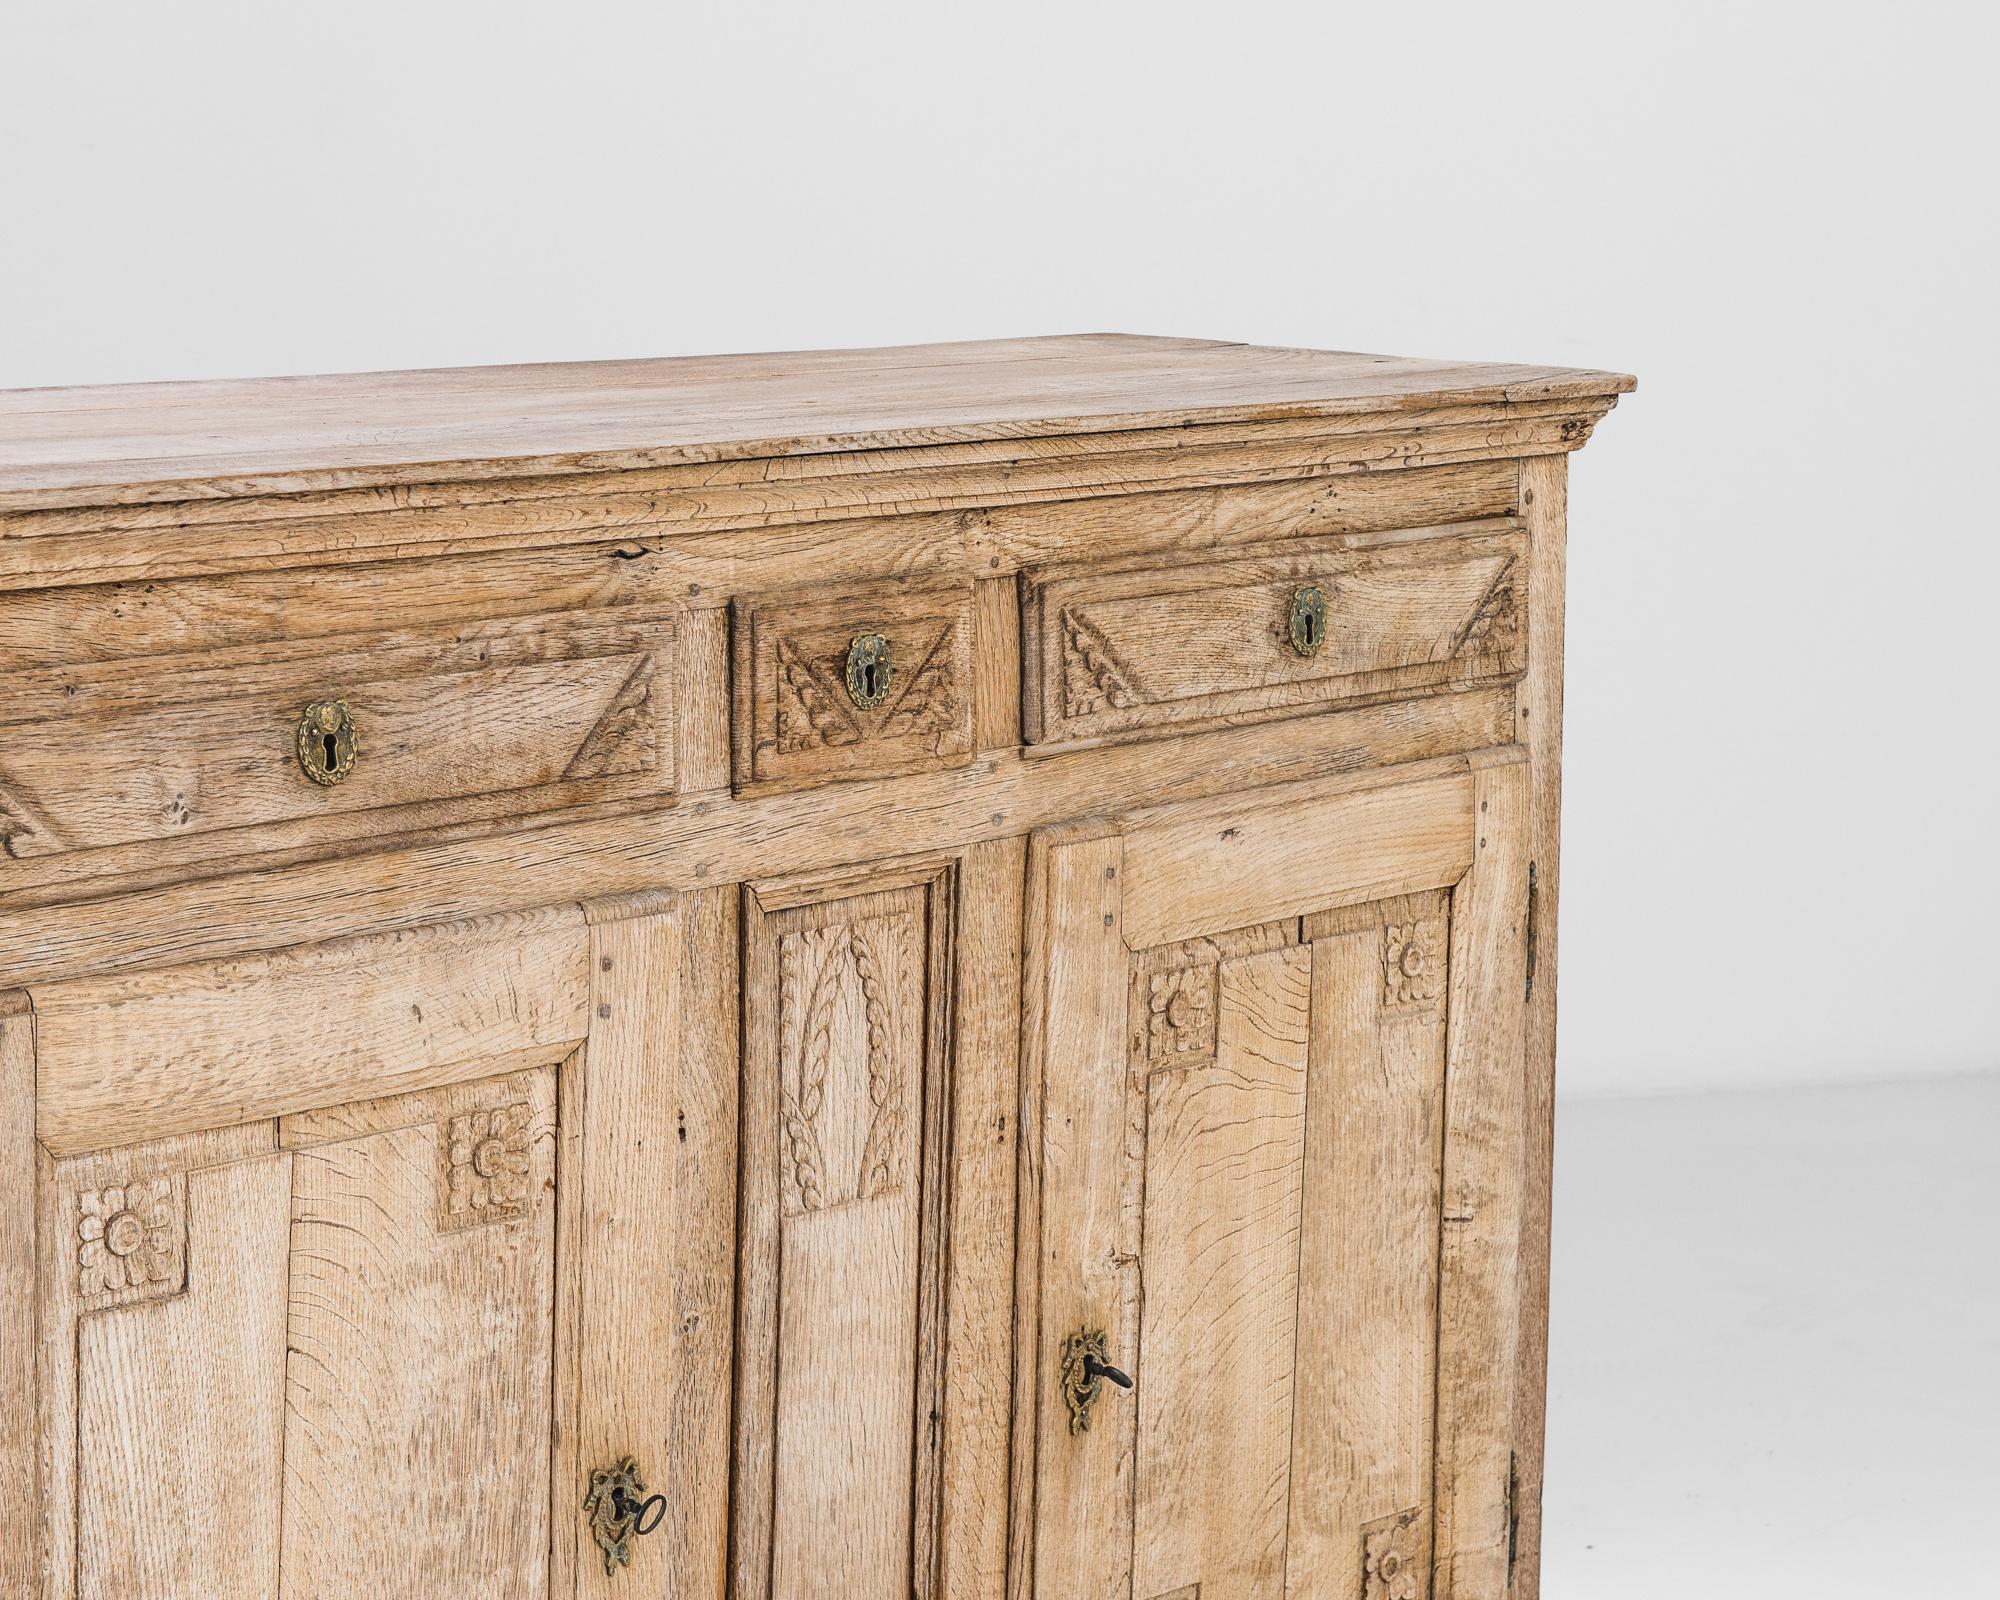 Carved detail enlivens this antique oak buffet. Made in France in the 1860s, motifs of leafy rosettes and victory palms give a verdant, triumphant impression. The wood has been restored in our workshops to a natural finish, revealing the warm russet